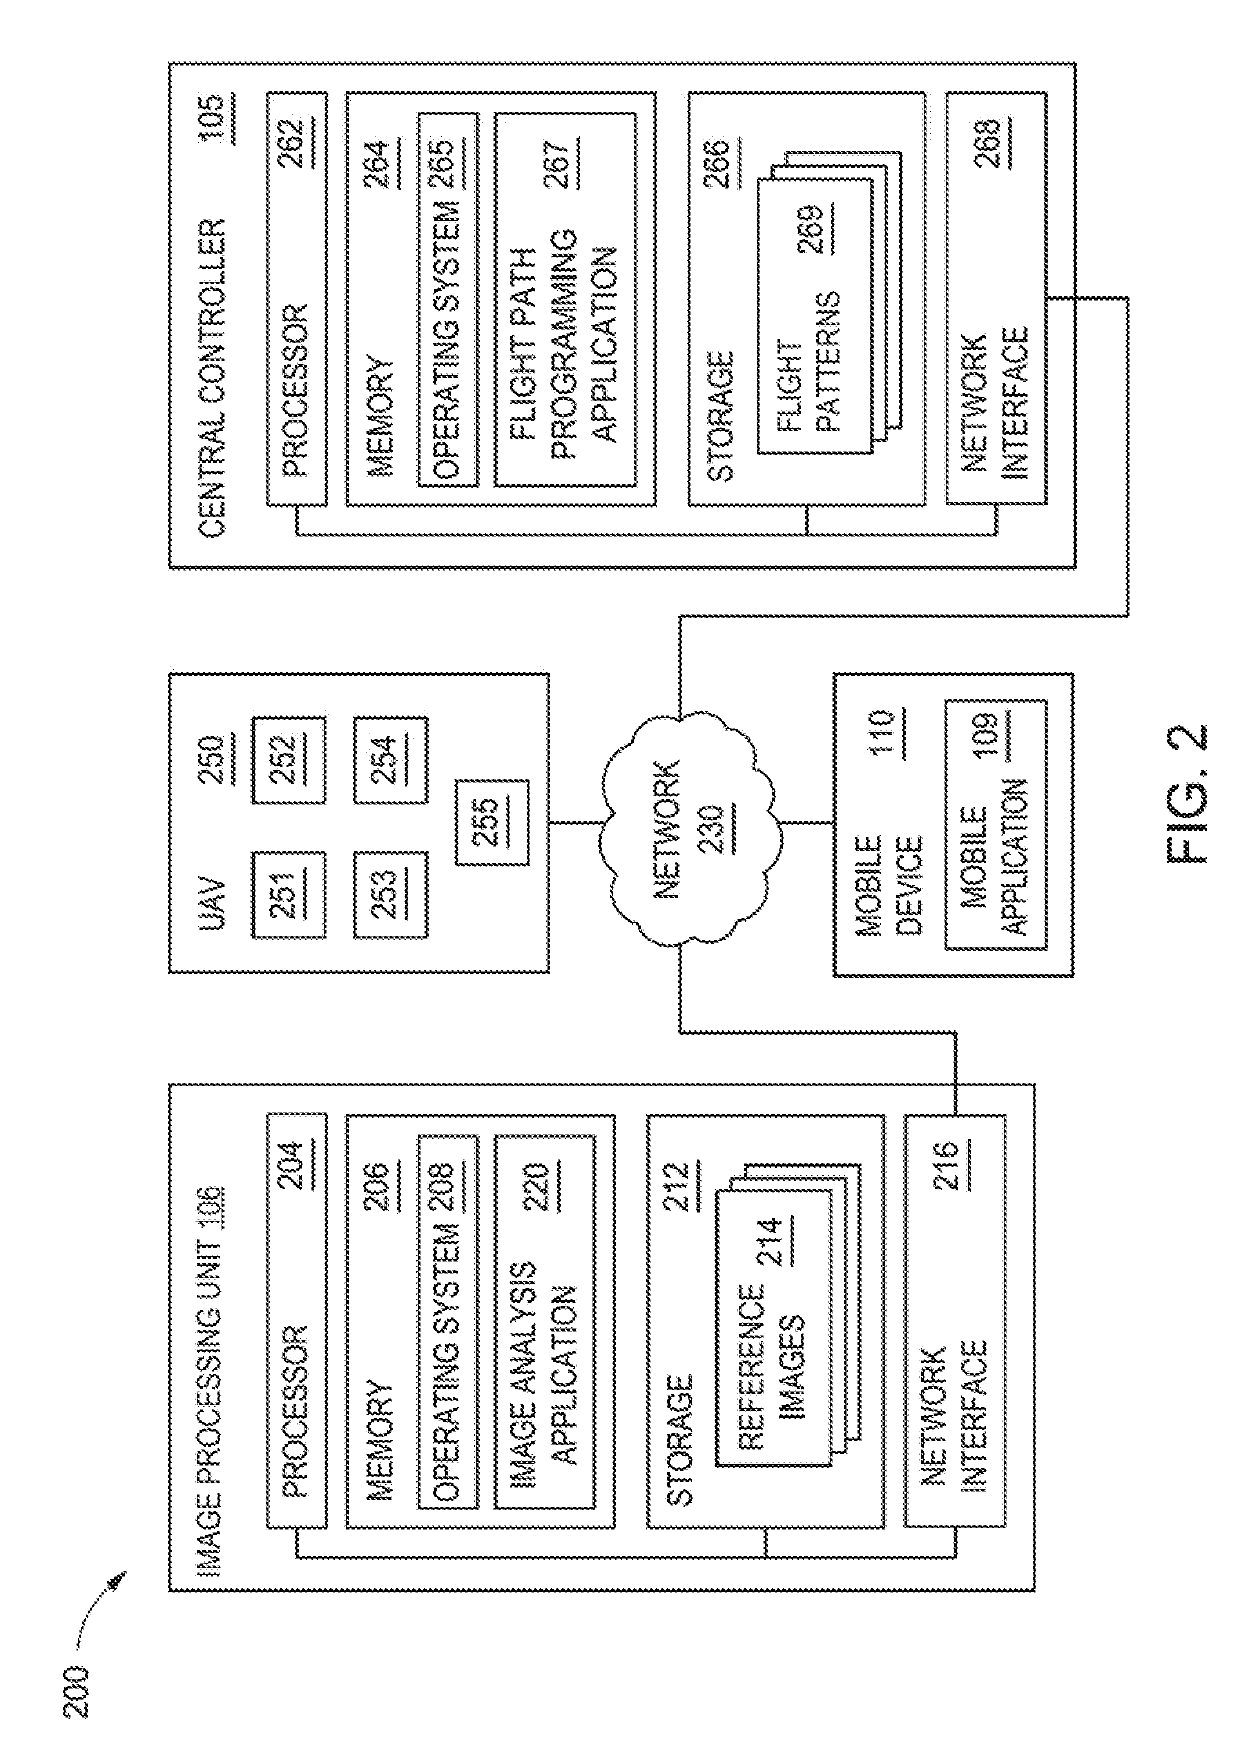 Image recognition for vehicle safety and damage inspection